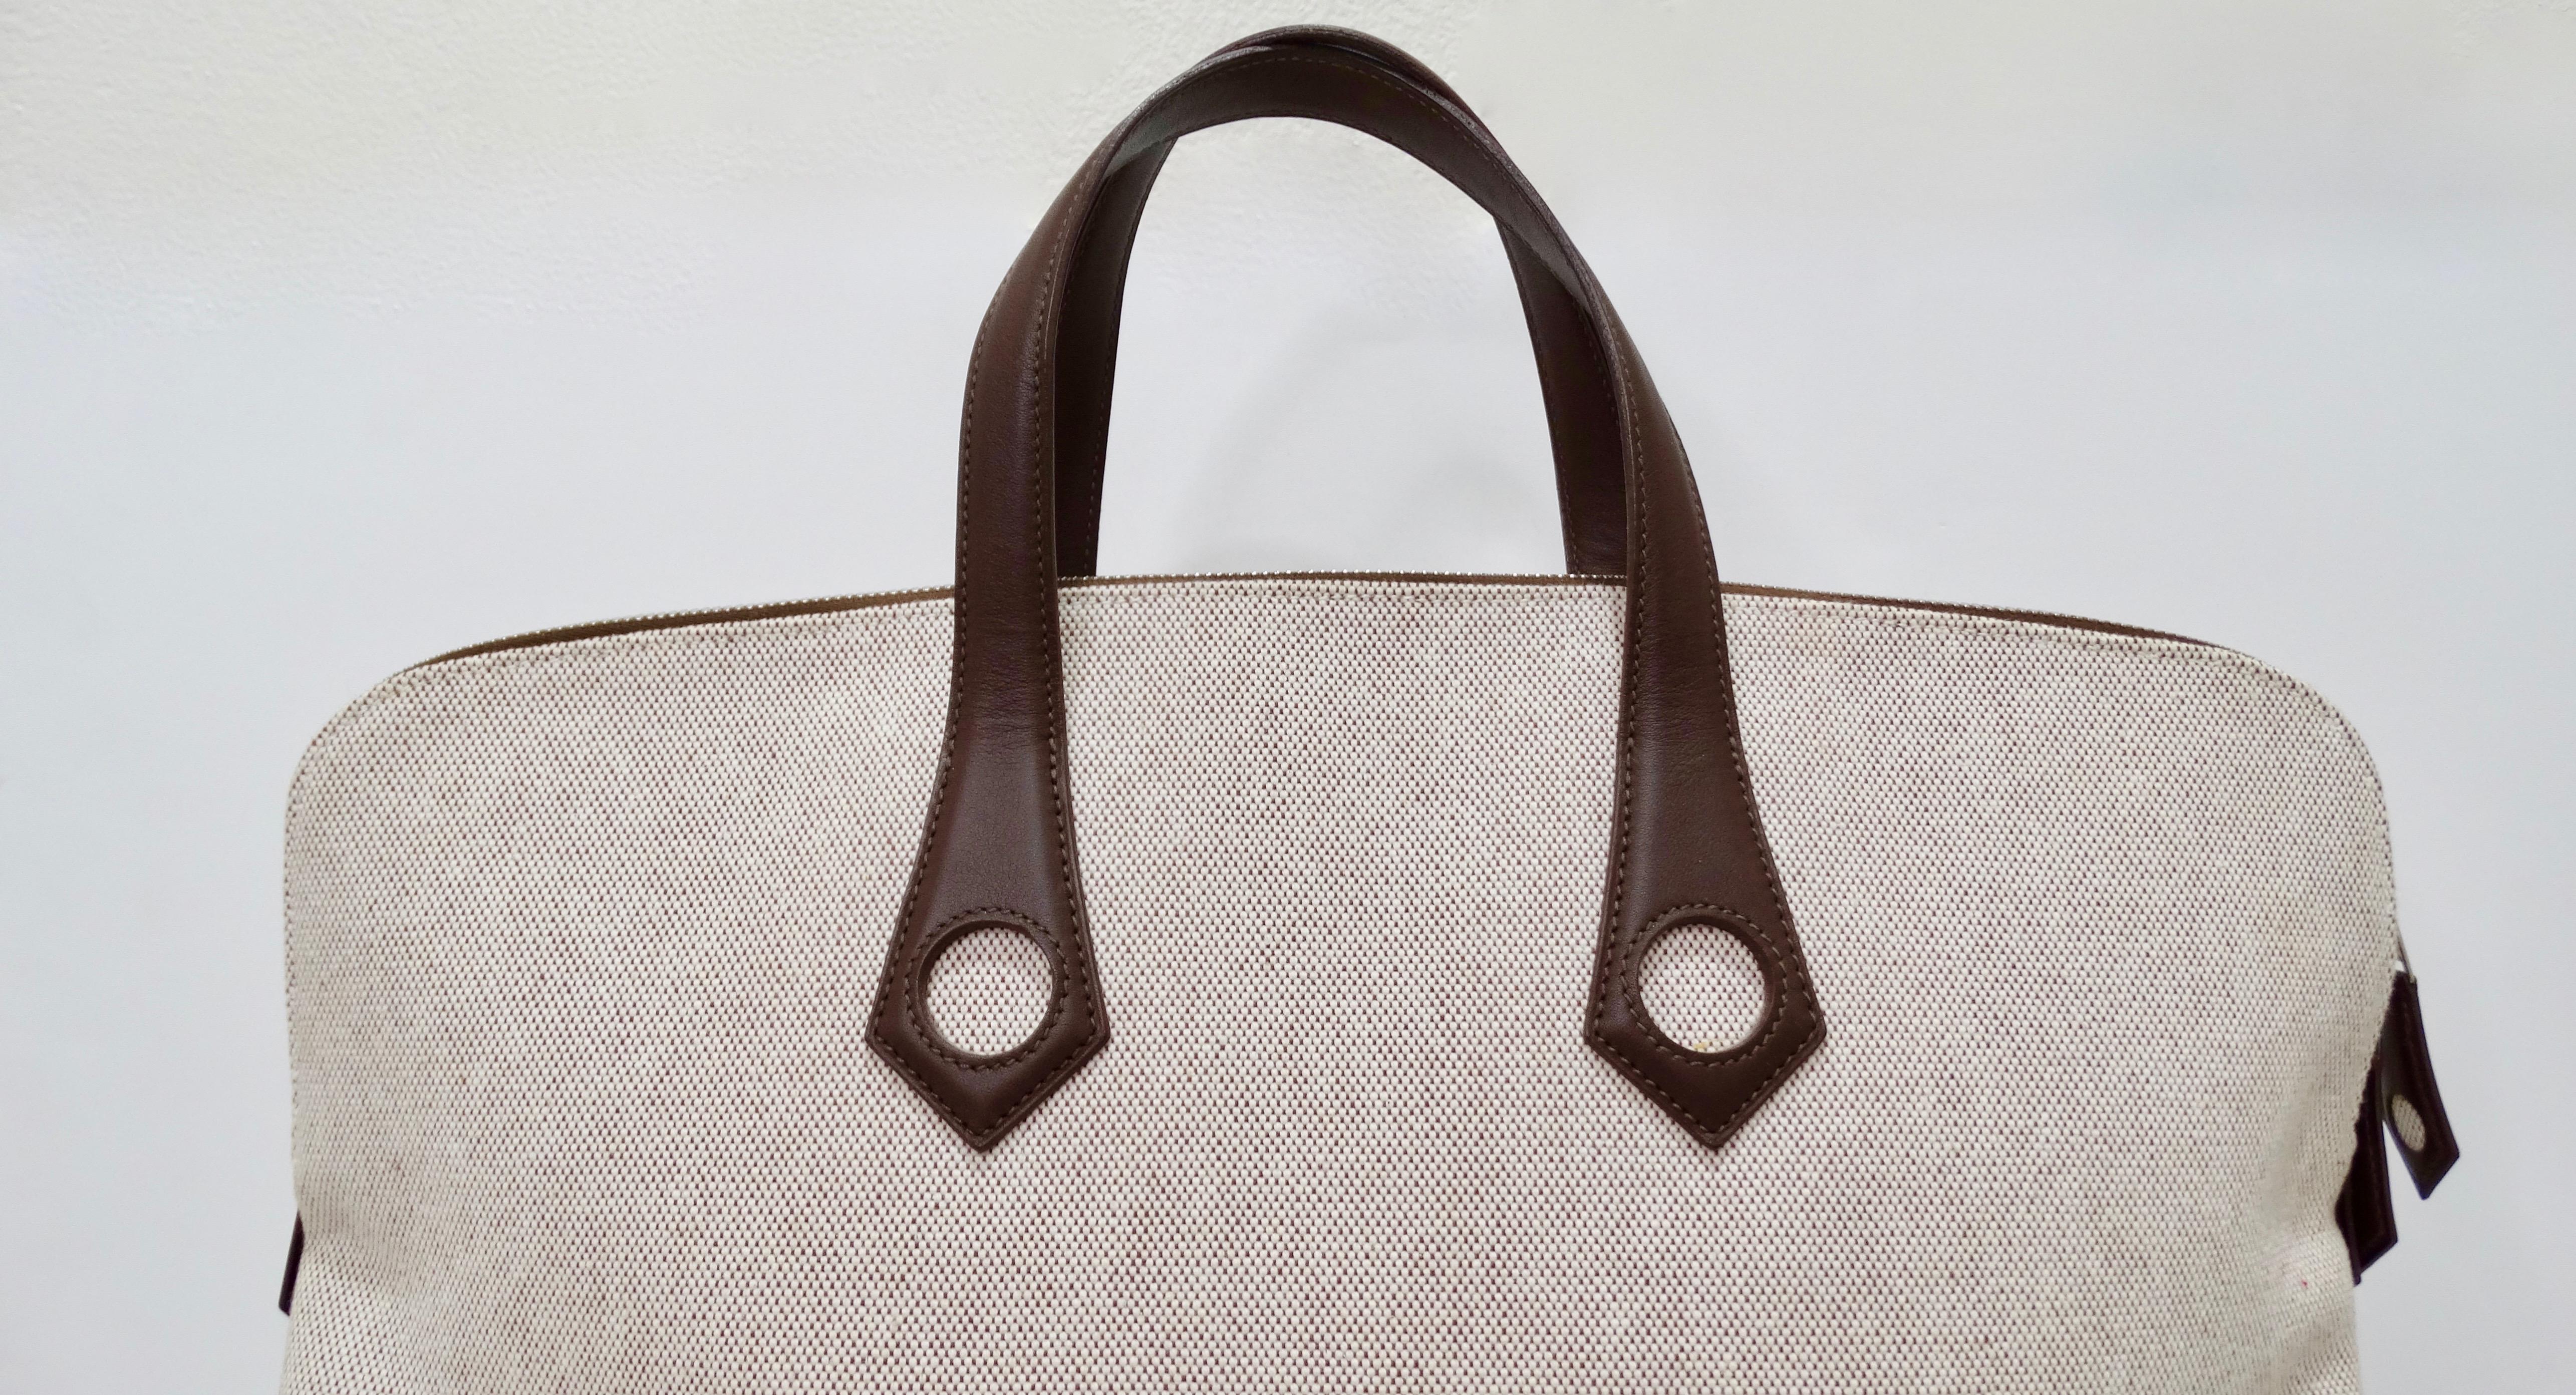 Hello Hermés lovers! Circa 2006, this large travel tote is crafted from tan and brown woven canvas and features pristine chocolate stitching, dual chocolate leather top handles with circle cutouts, tonal leather pipping, silver tone hardware and a